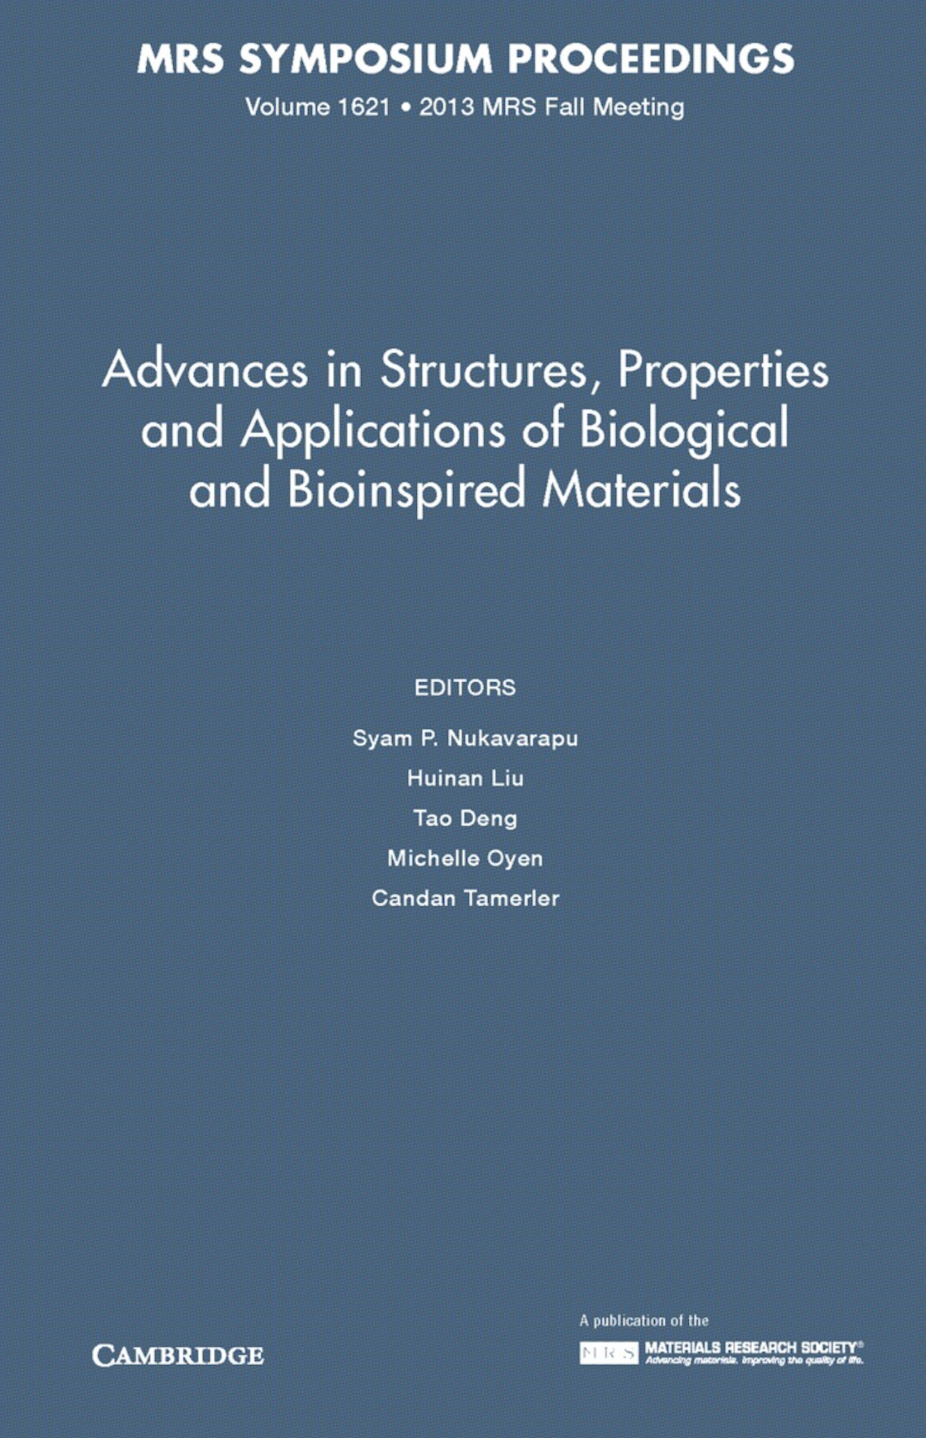  Structures-Properties-Applications-Biological-Bioinspired